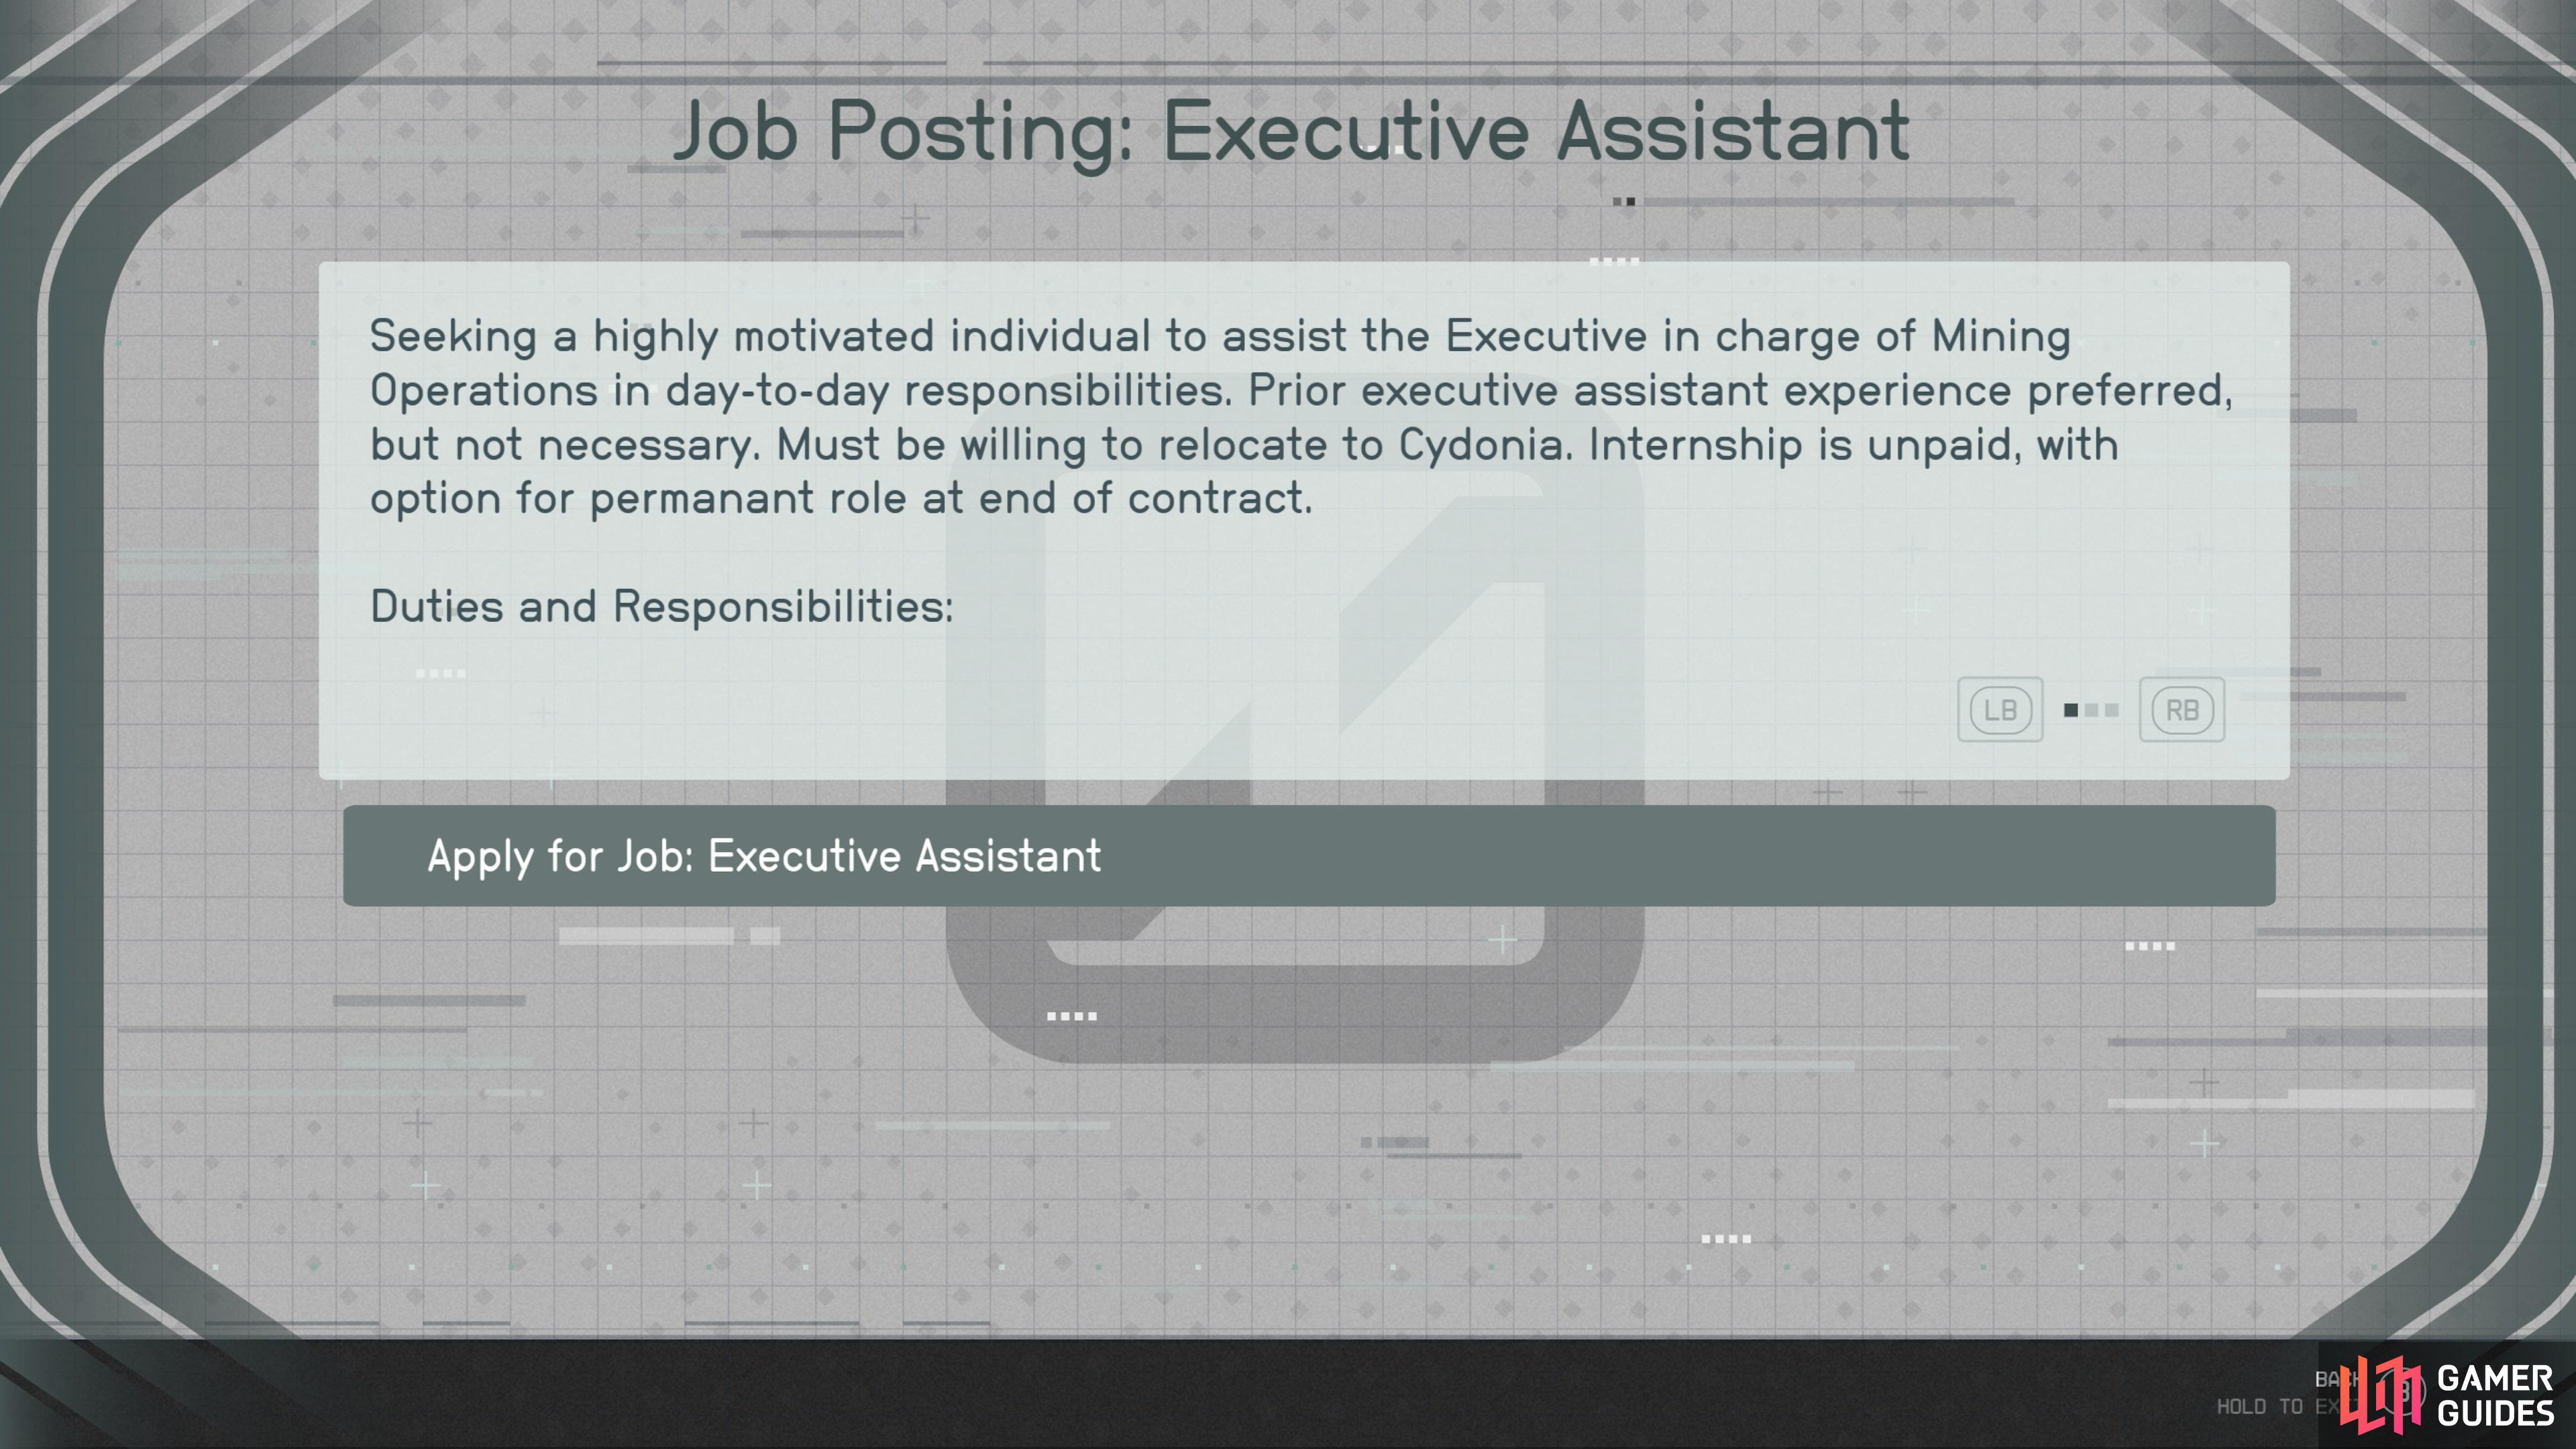 Choose to look at the Executive Assistant posting and apply for the job.